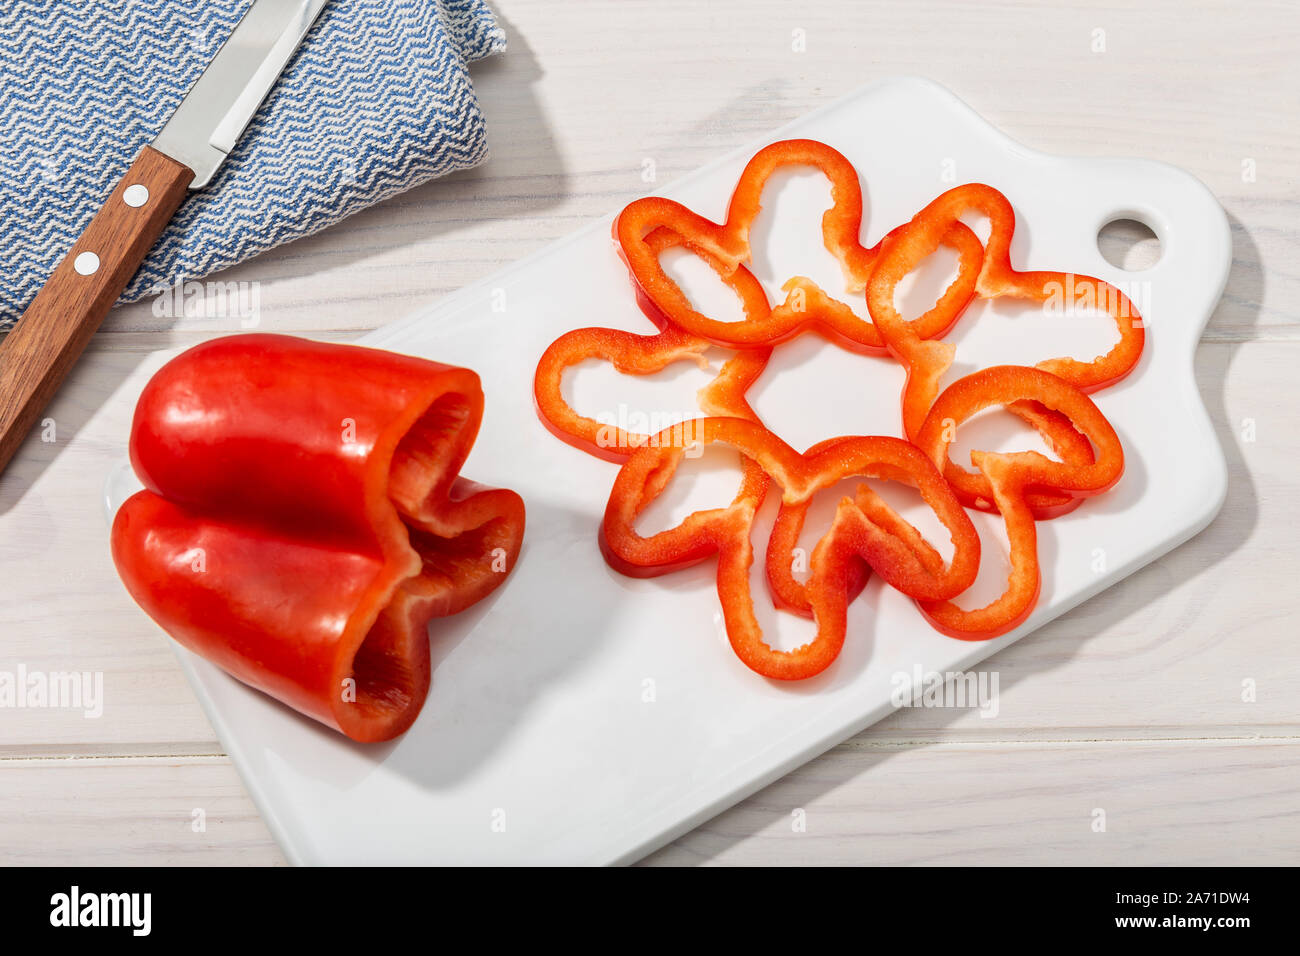 Red bell pepper isolated on cutting board.. Capsicum annuum cultivars Stock Photo